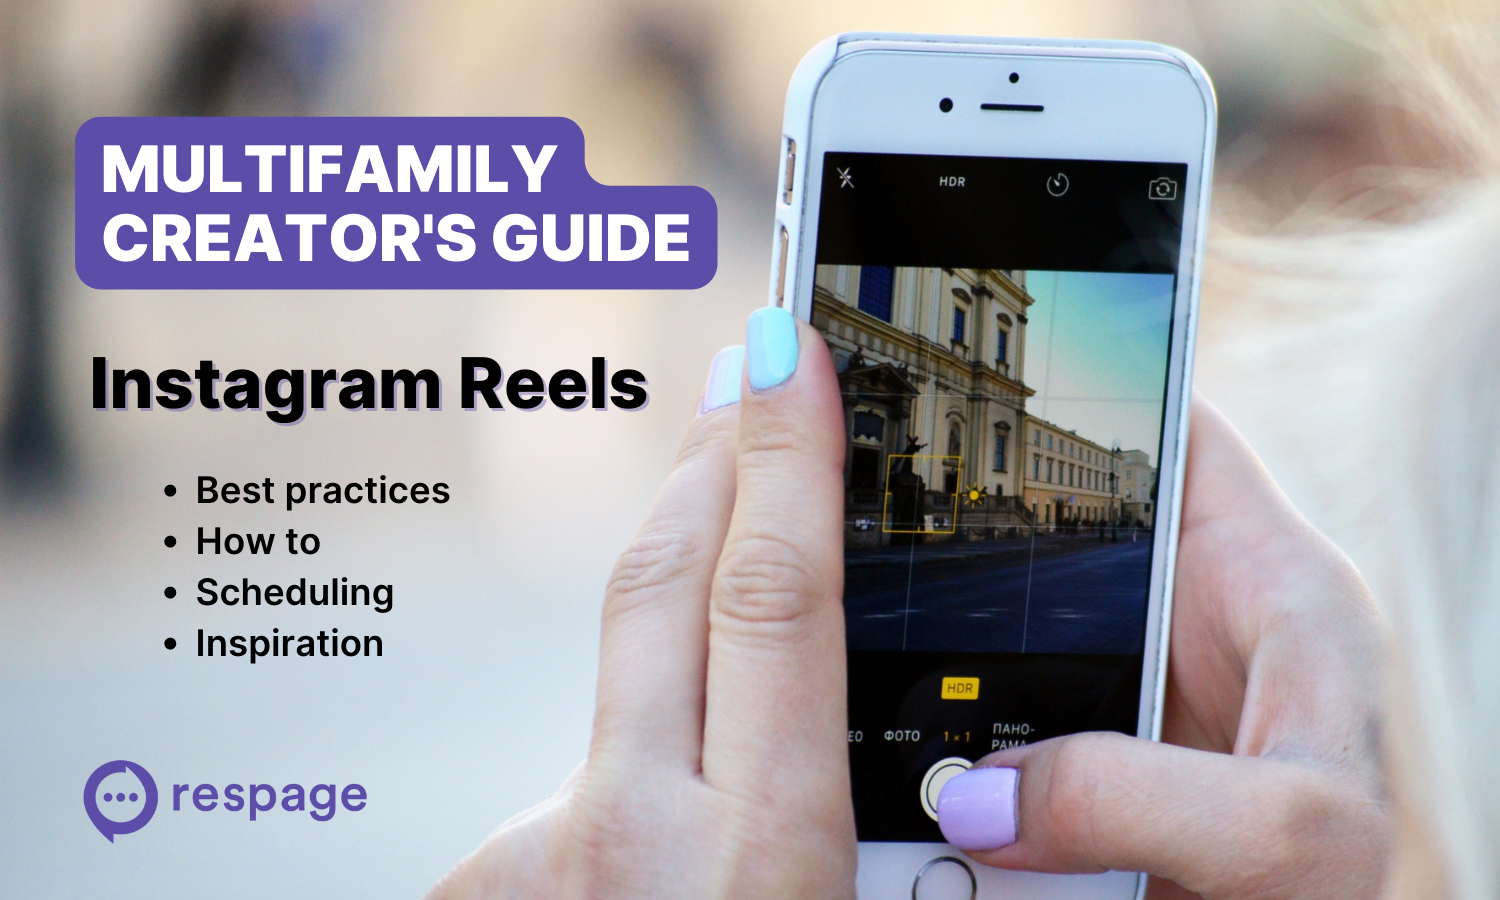 A multifamily marketer's guide to Instagram Reels